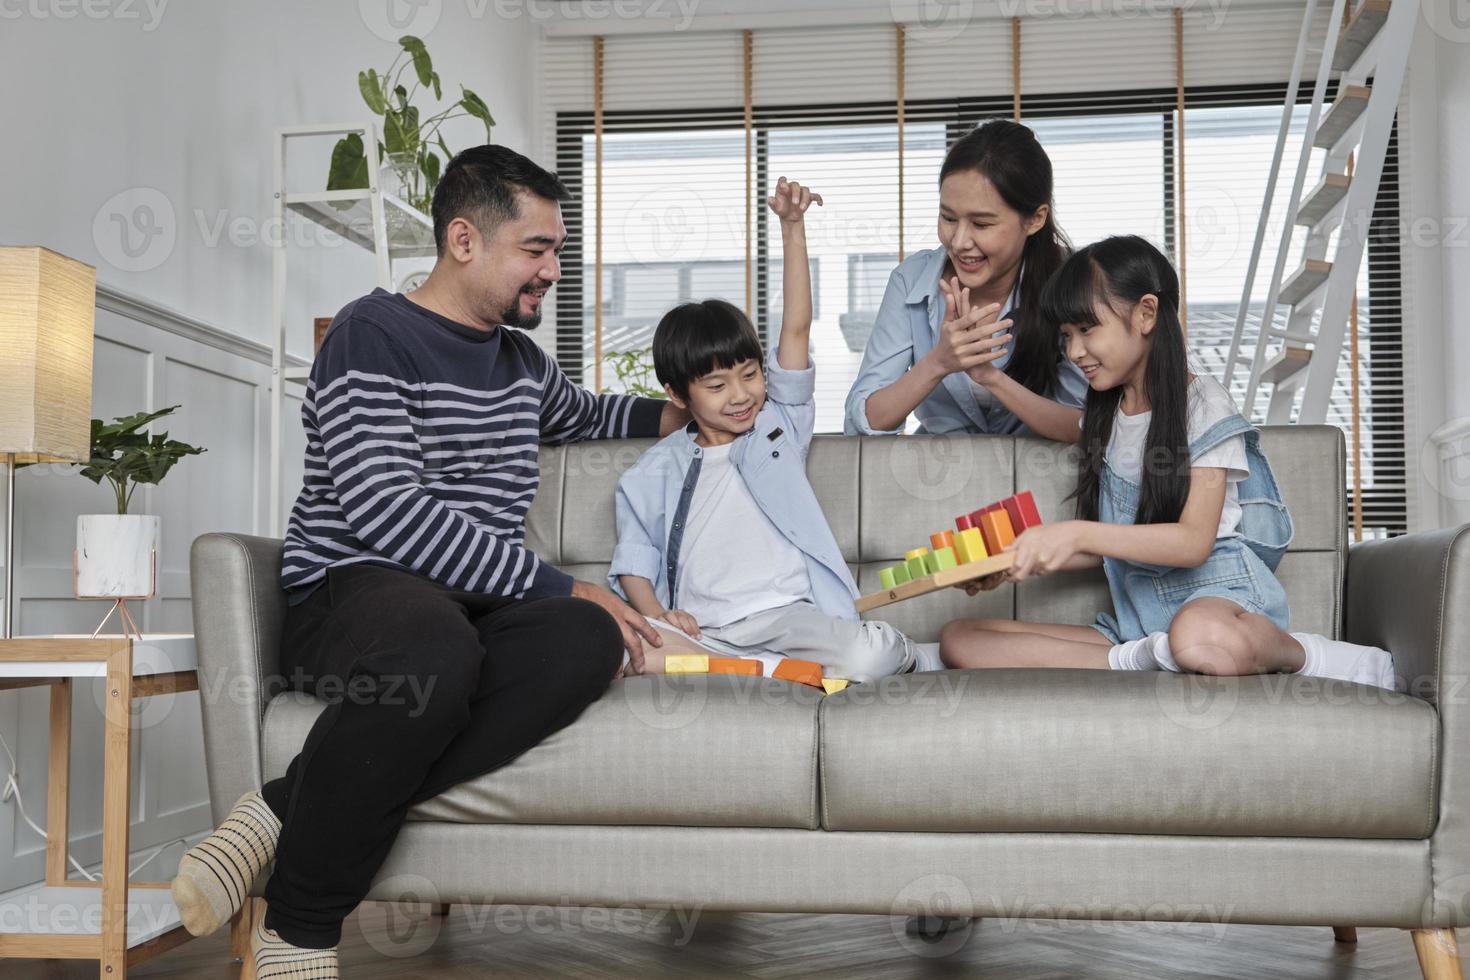 Happy Asian lovely Thai family care, dad, mum, and little children have fun playing with colorful toy blocks together on sofa in white living room, leisure weekend, and domestic wellbeing lifestyle. photo